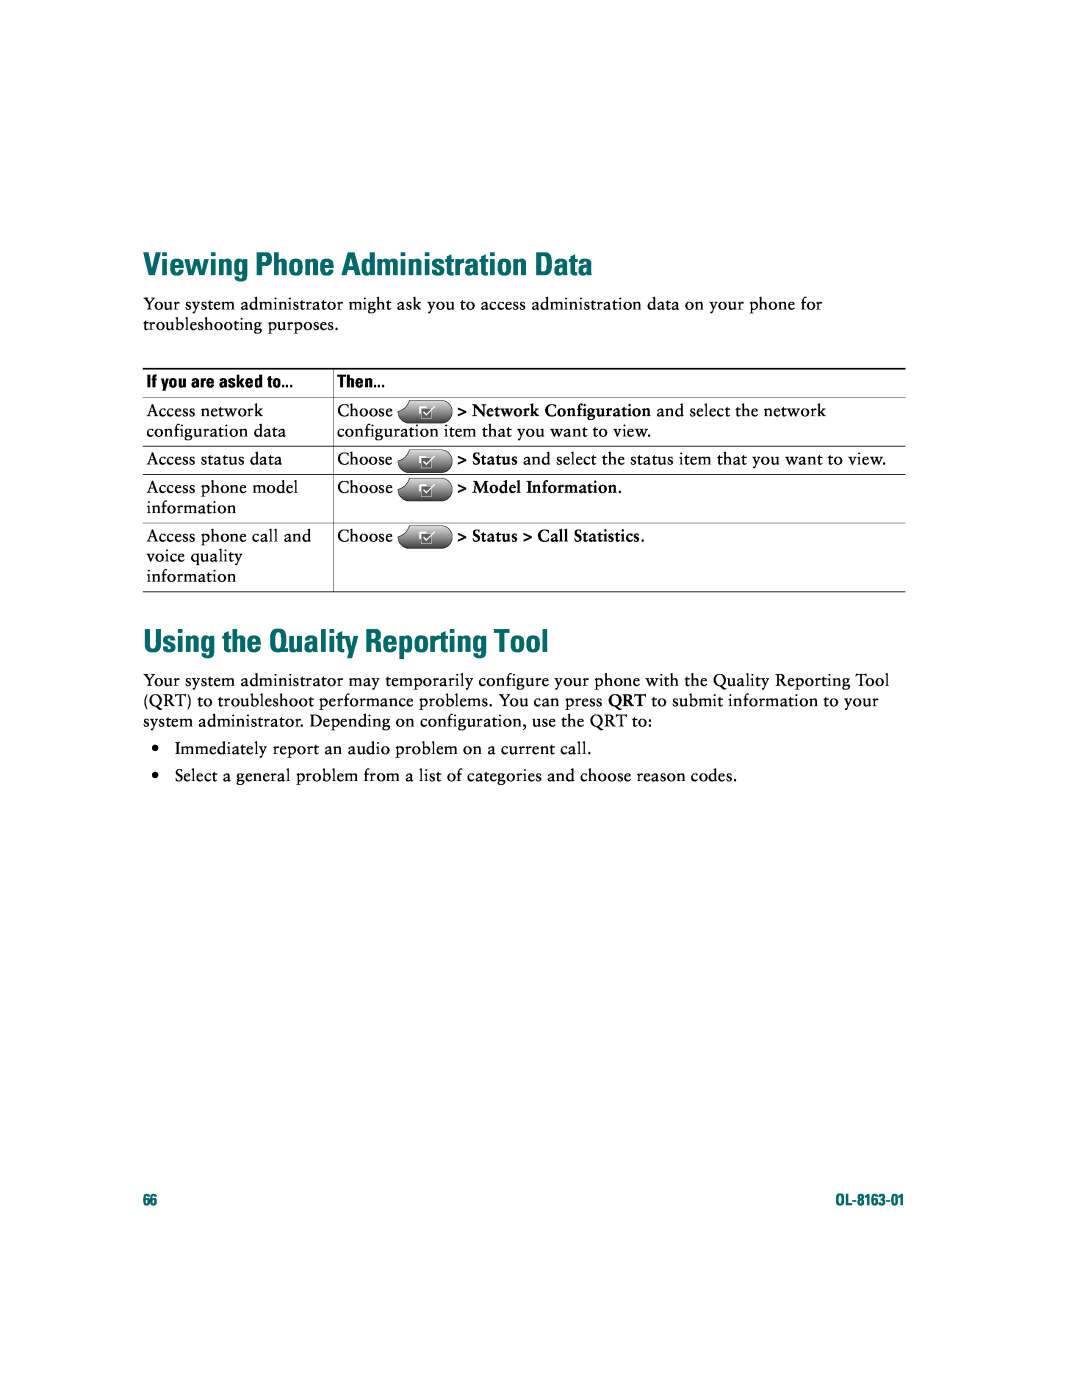 Cisco Systems 7961G/7961G-GE Viewing Phone Administration Data, Using the Quality Reporting Tool, Model Information 